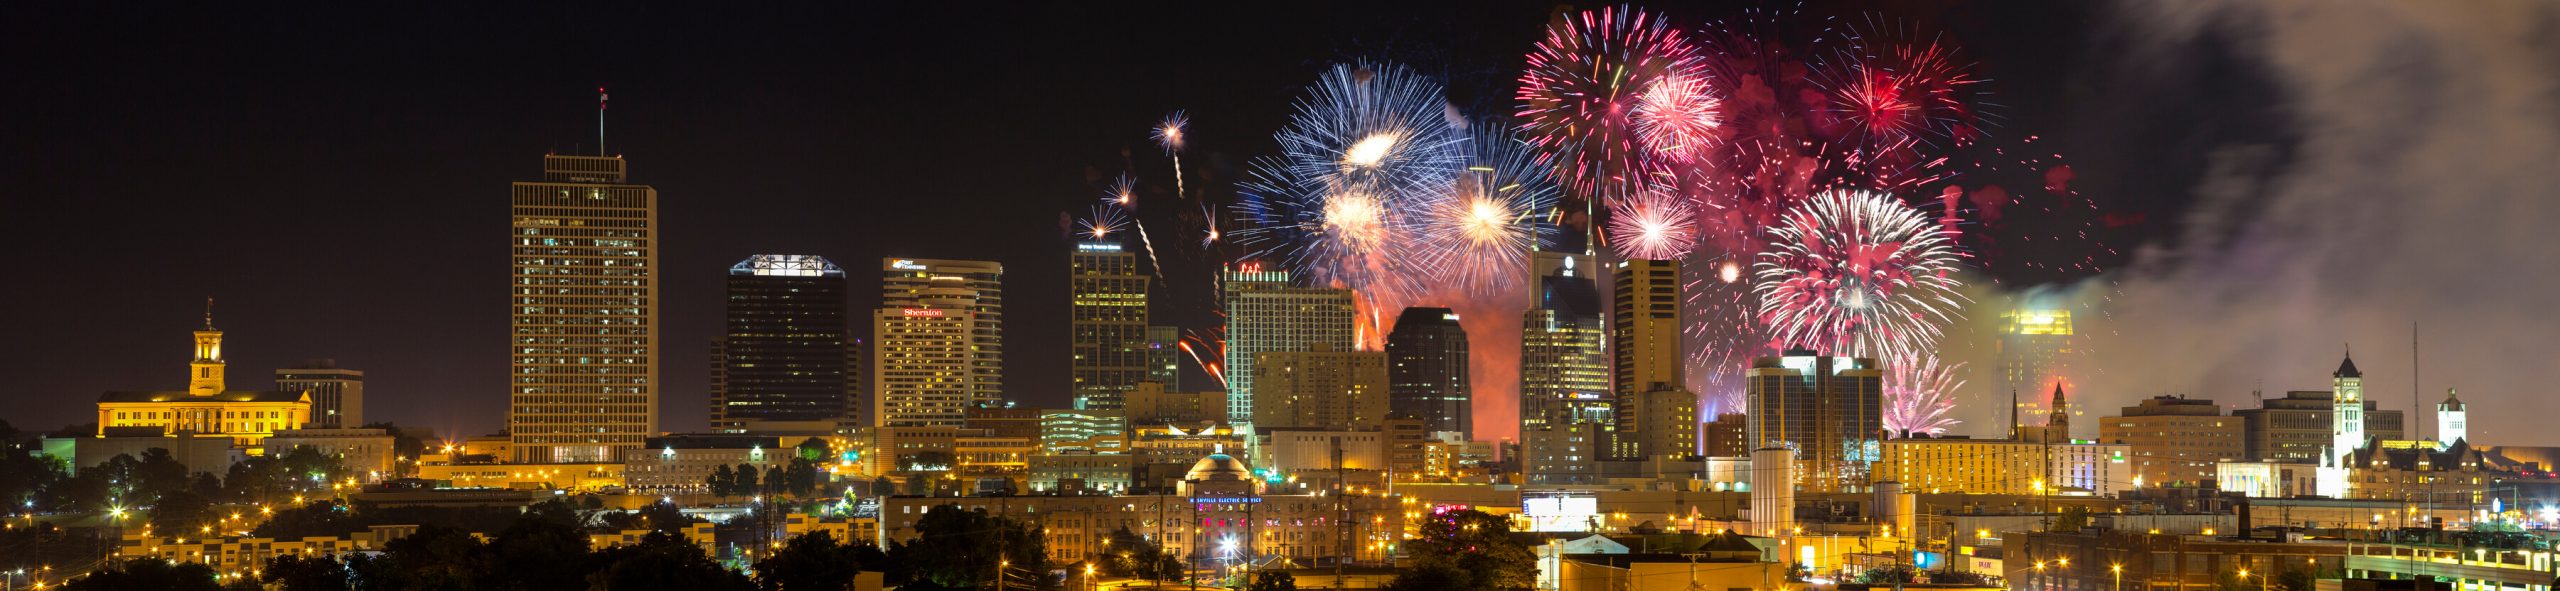 Spend New Year's Eve at the Bicentennial Mall State Park in Nashville